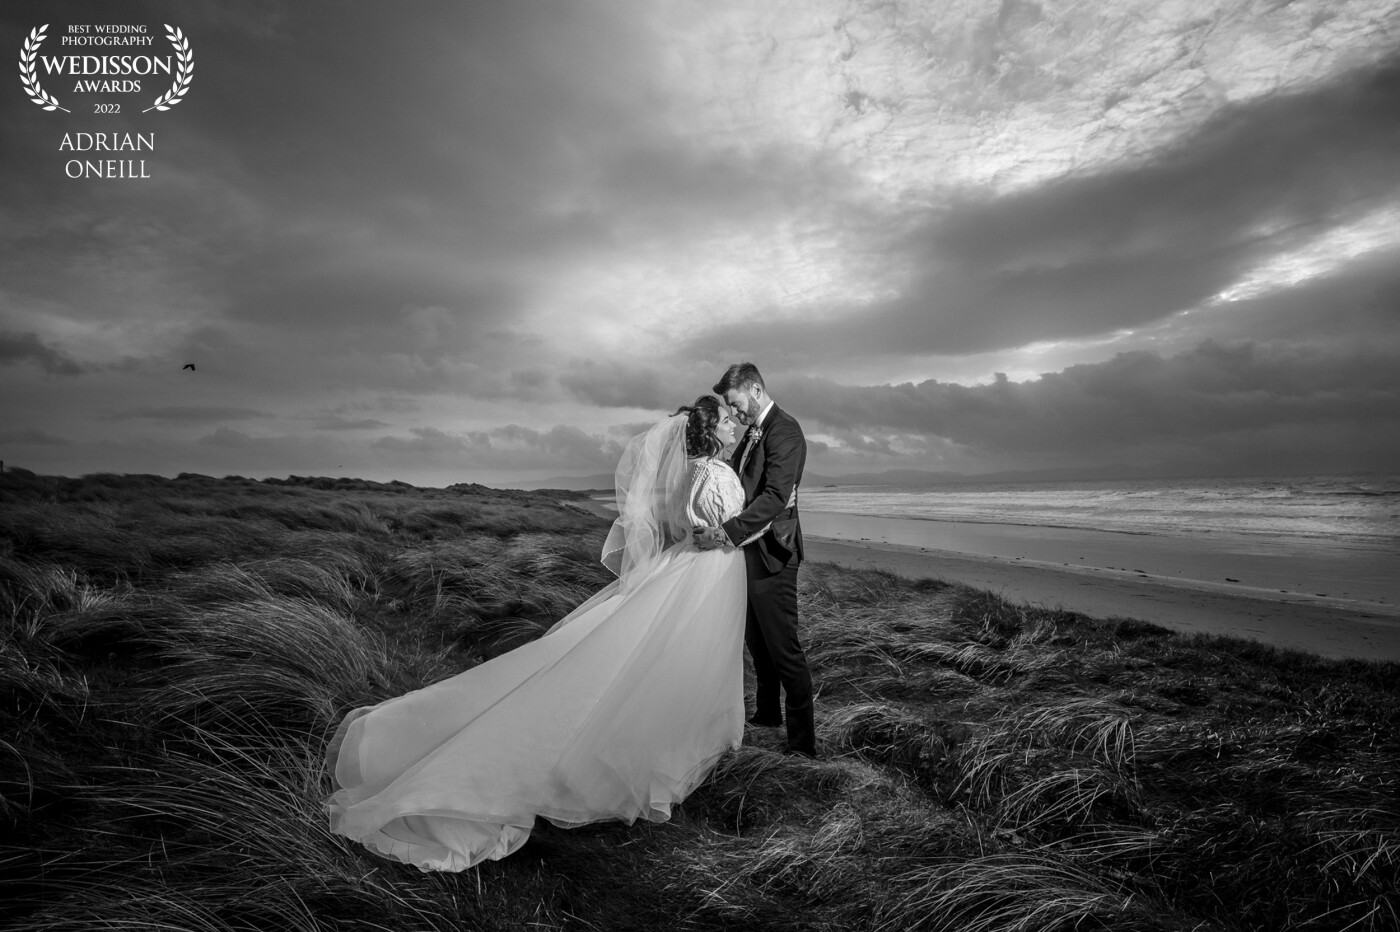 This couple suggested to have their images taken on this beach....I was delighted to have got the chance to get this for the couple. the weather just just broke afterwards, very lucky indeed.